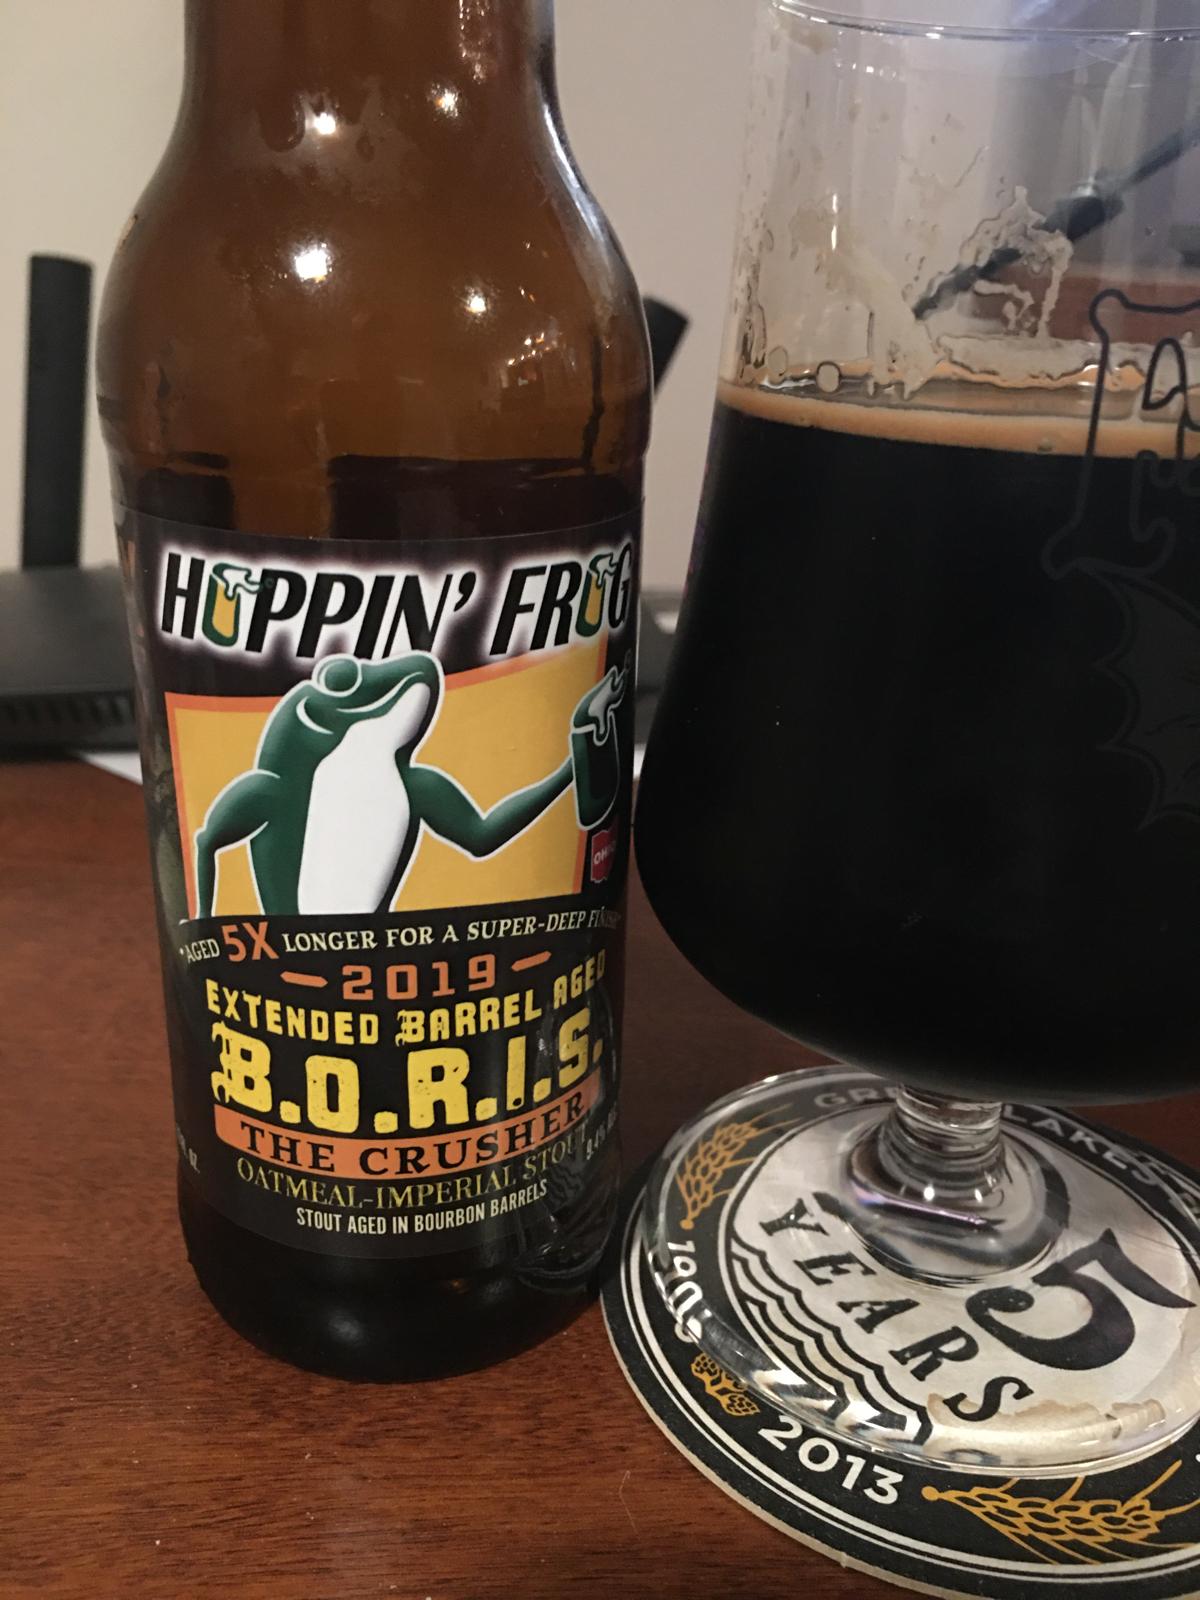 B.O.R.I.S. The Crusher Oatmeal Imperial Stout Extended Barrel Aged